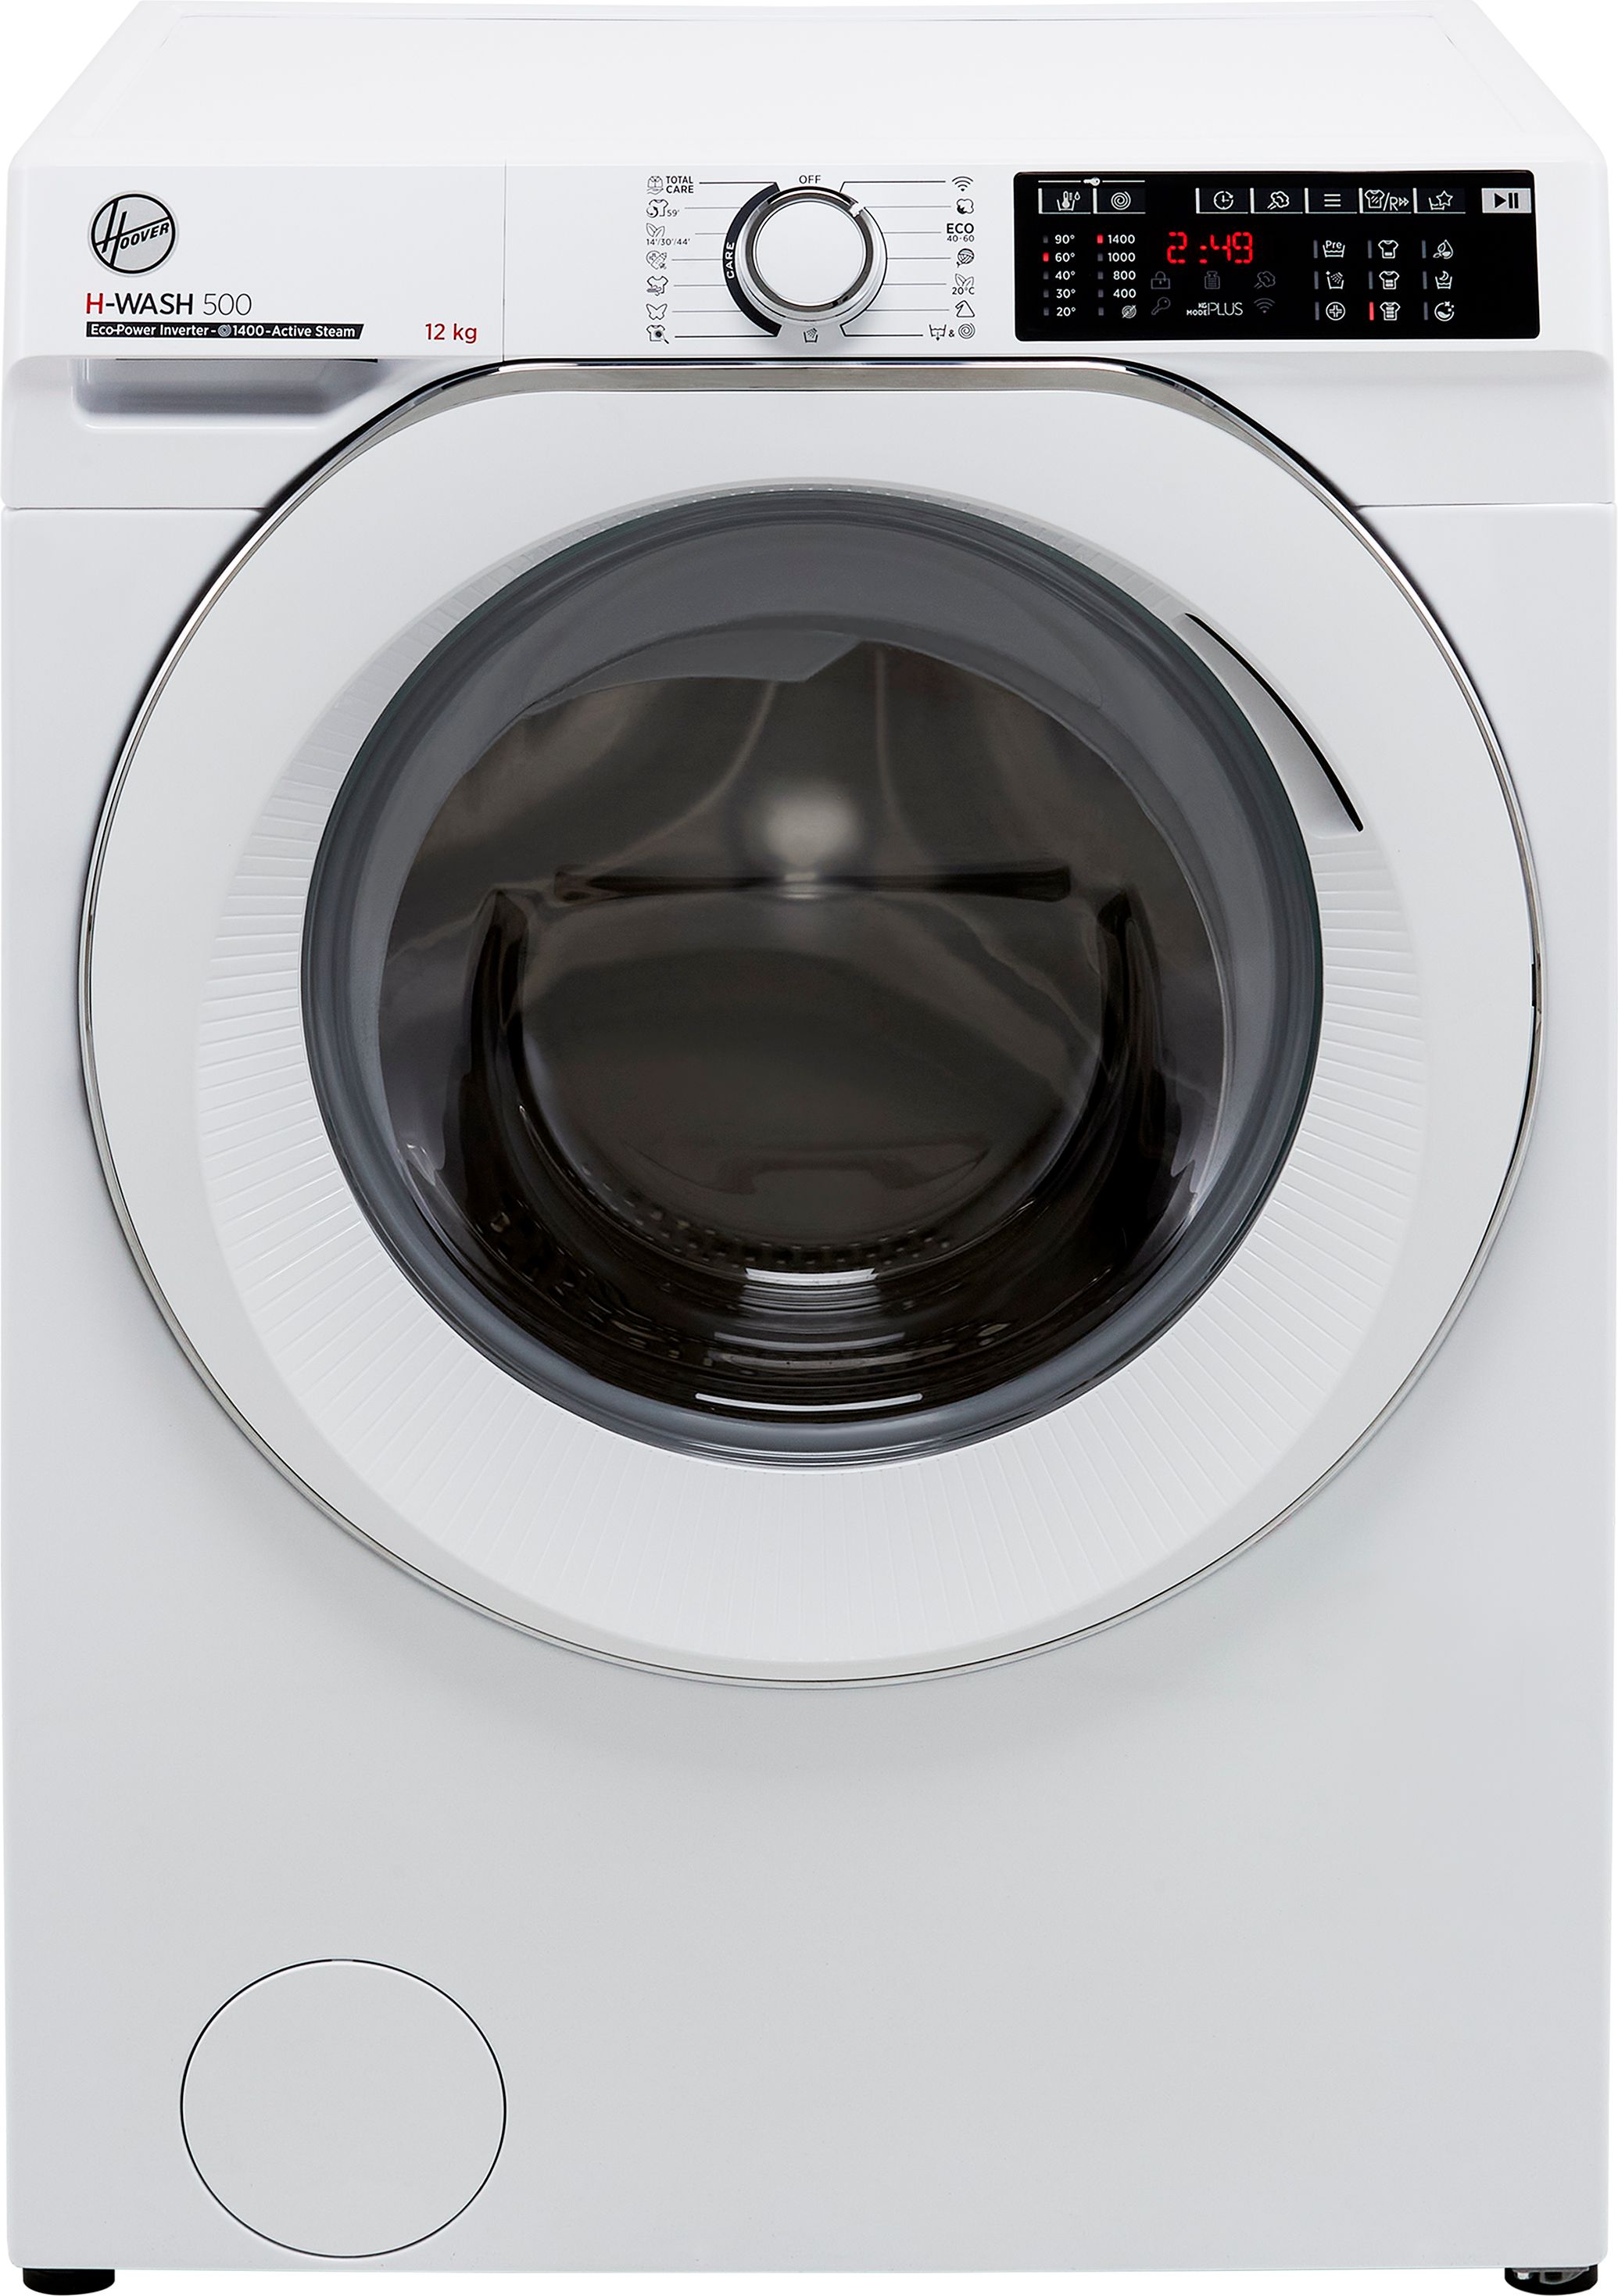 Hoover H-WASH 500 HW412AMC/1 12kg Washing Machine with 1400 rpm - White - A Rated, White